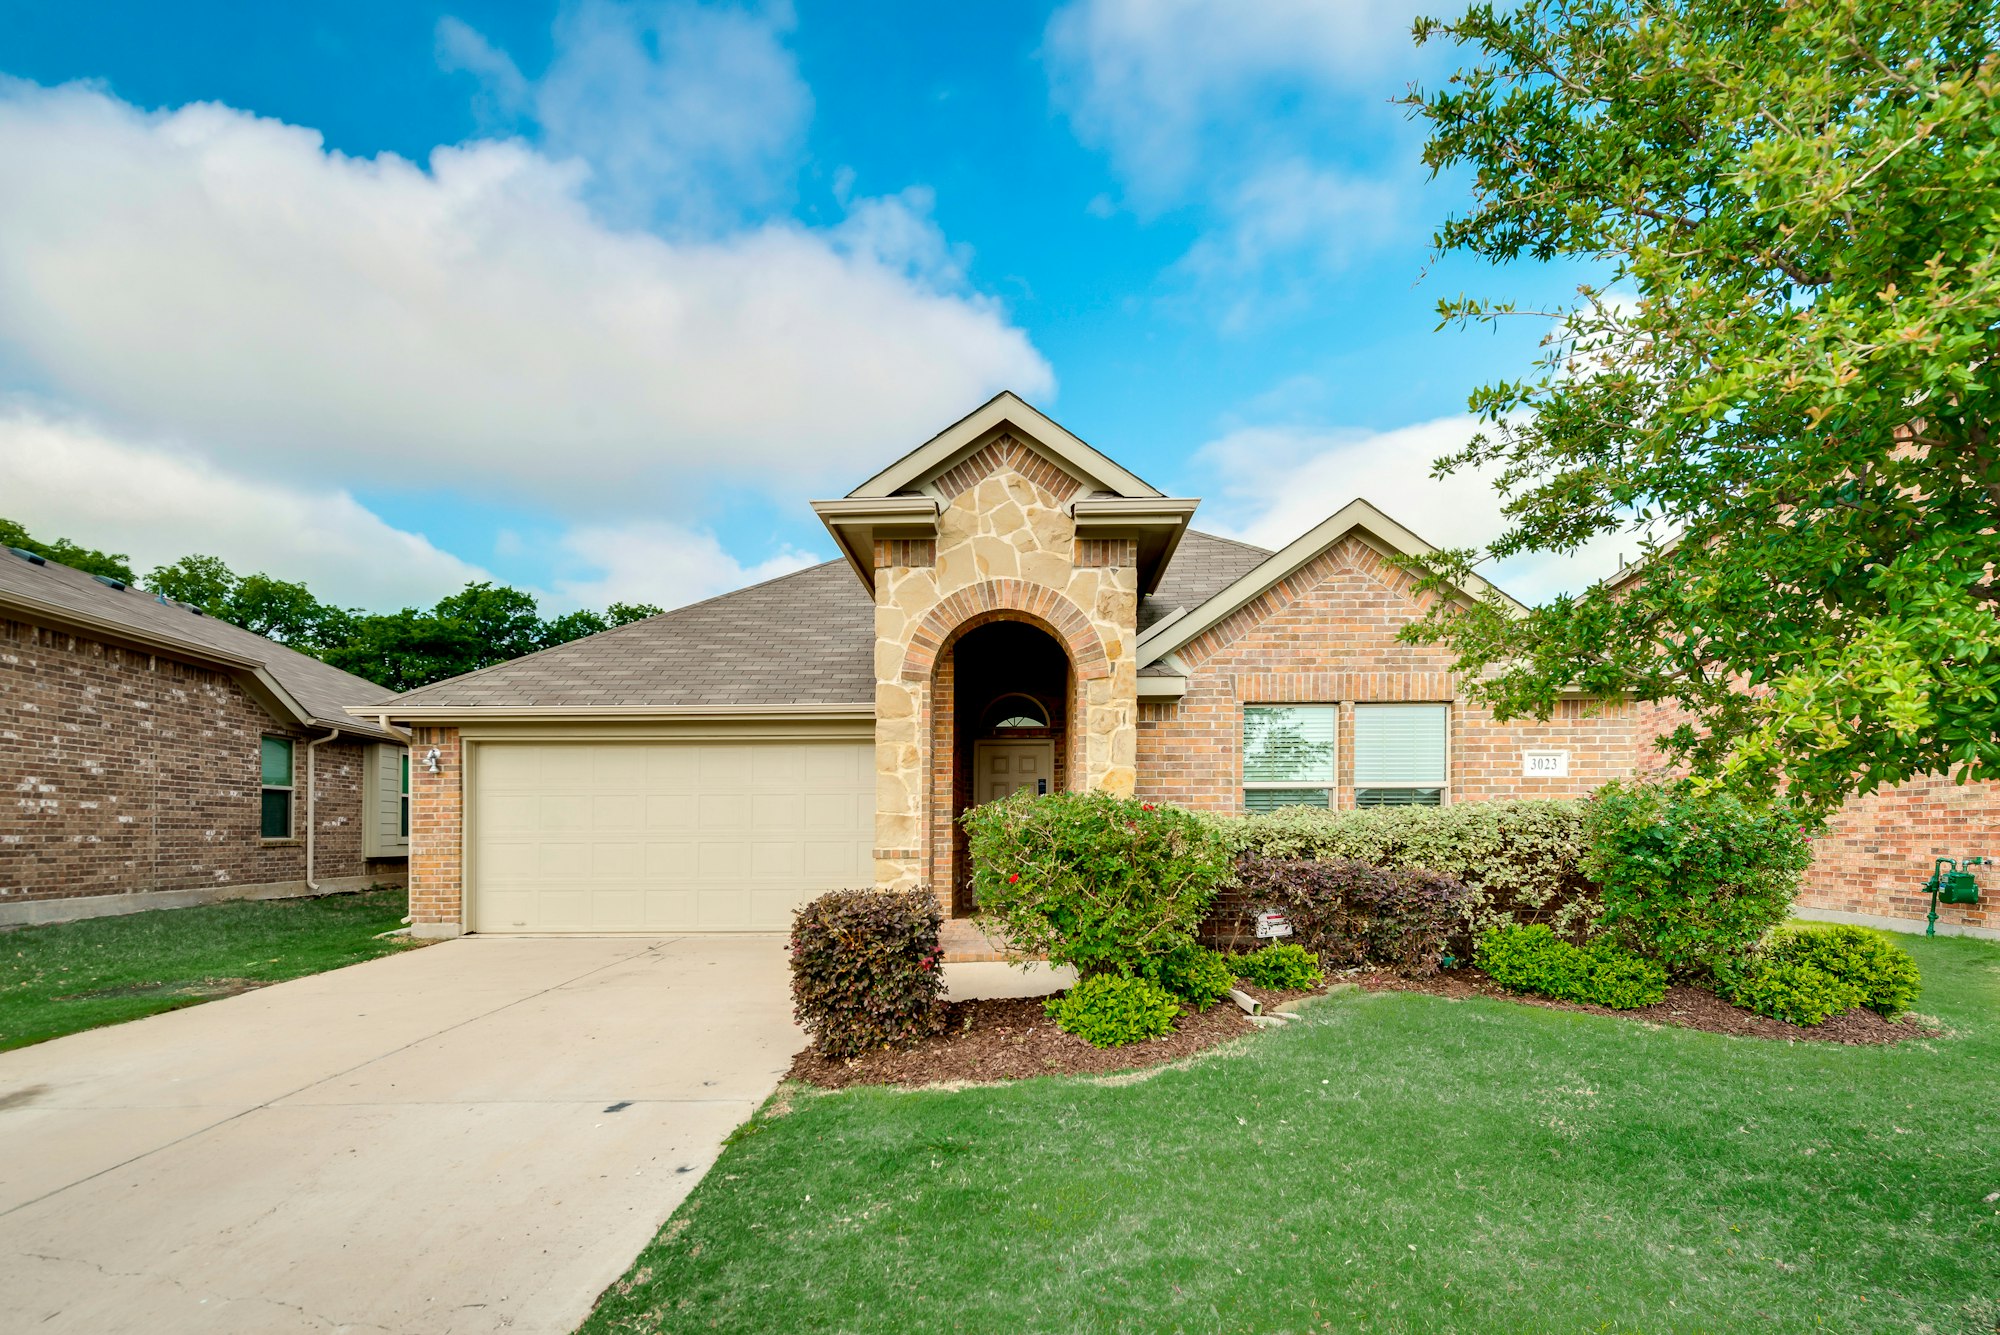 Photo 1 of 26 - 3023 Rocking Hills Trl, Forney, TX 75126